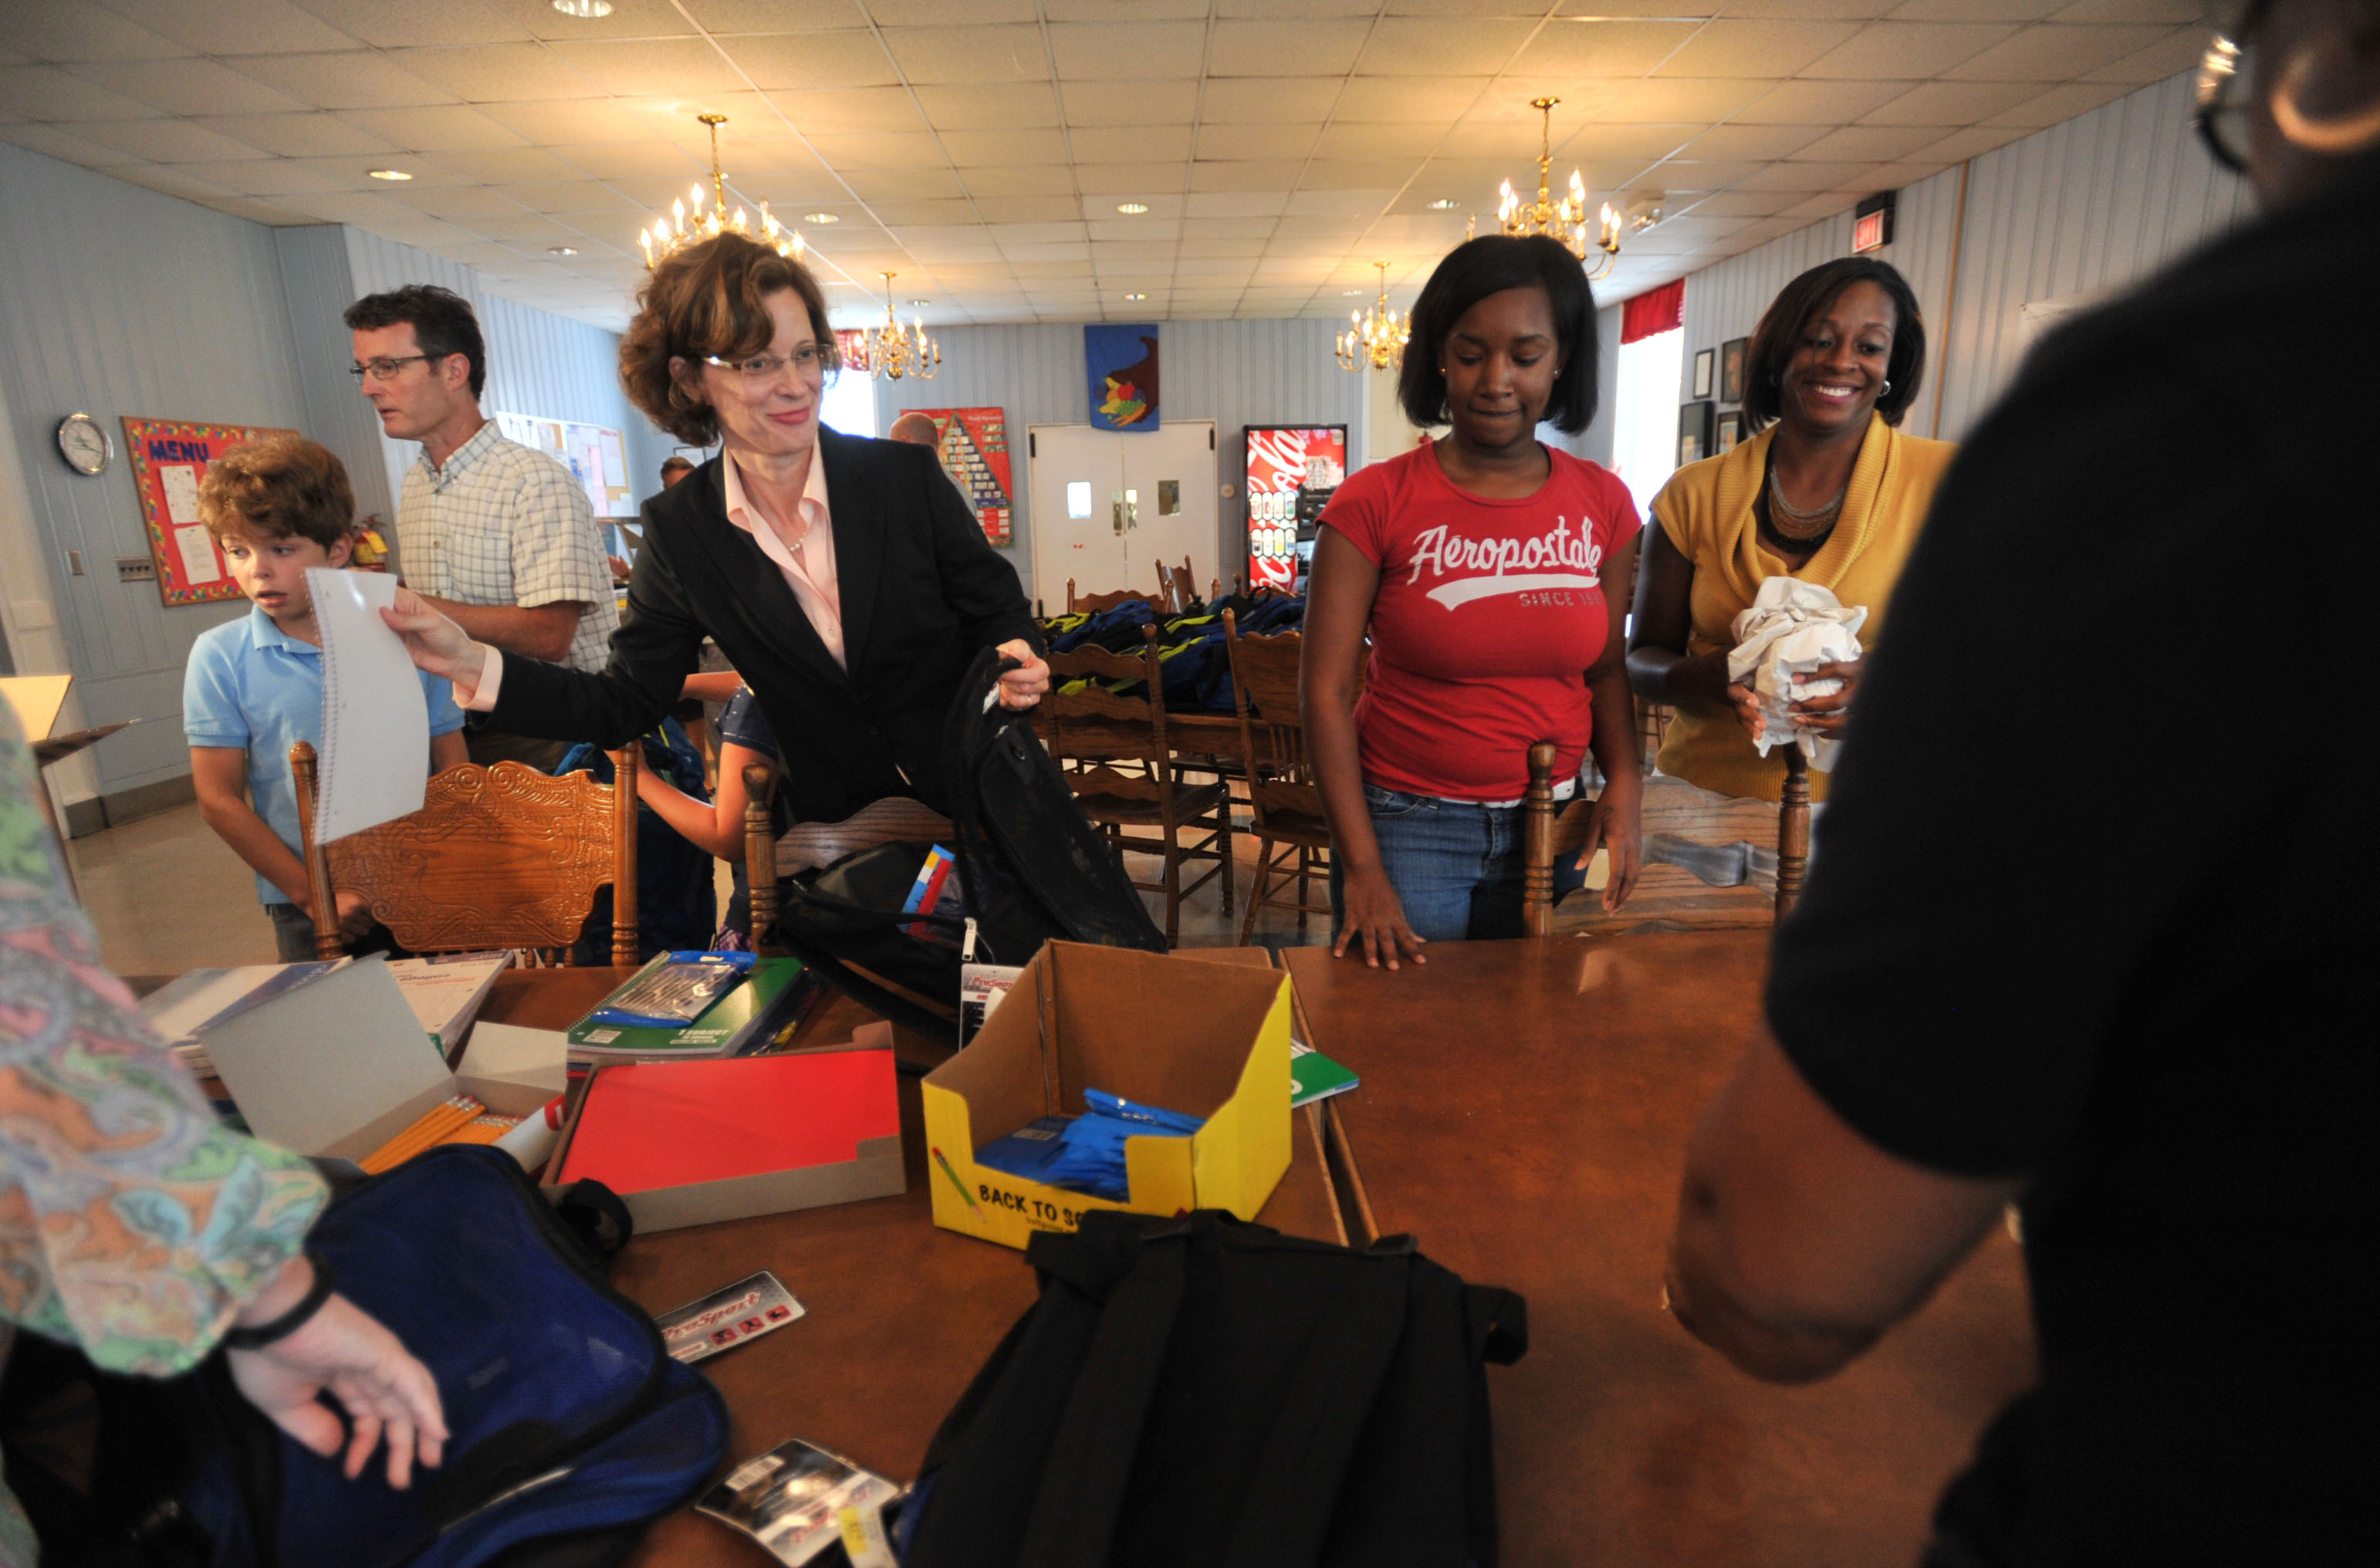 With the help of son, Vinson, left, and husband Ron, U. S. Senate candidate Michelle Nunn and other volunteers stuffed book bags with school supplies for residents of the Georgia Industrial Childrens Home, Aug. 7, 2013. (Beau Cabell—The Telegraph/AP)